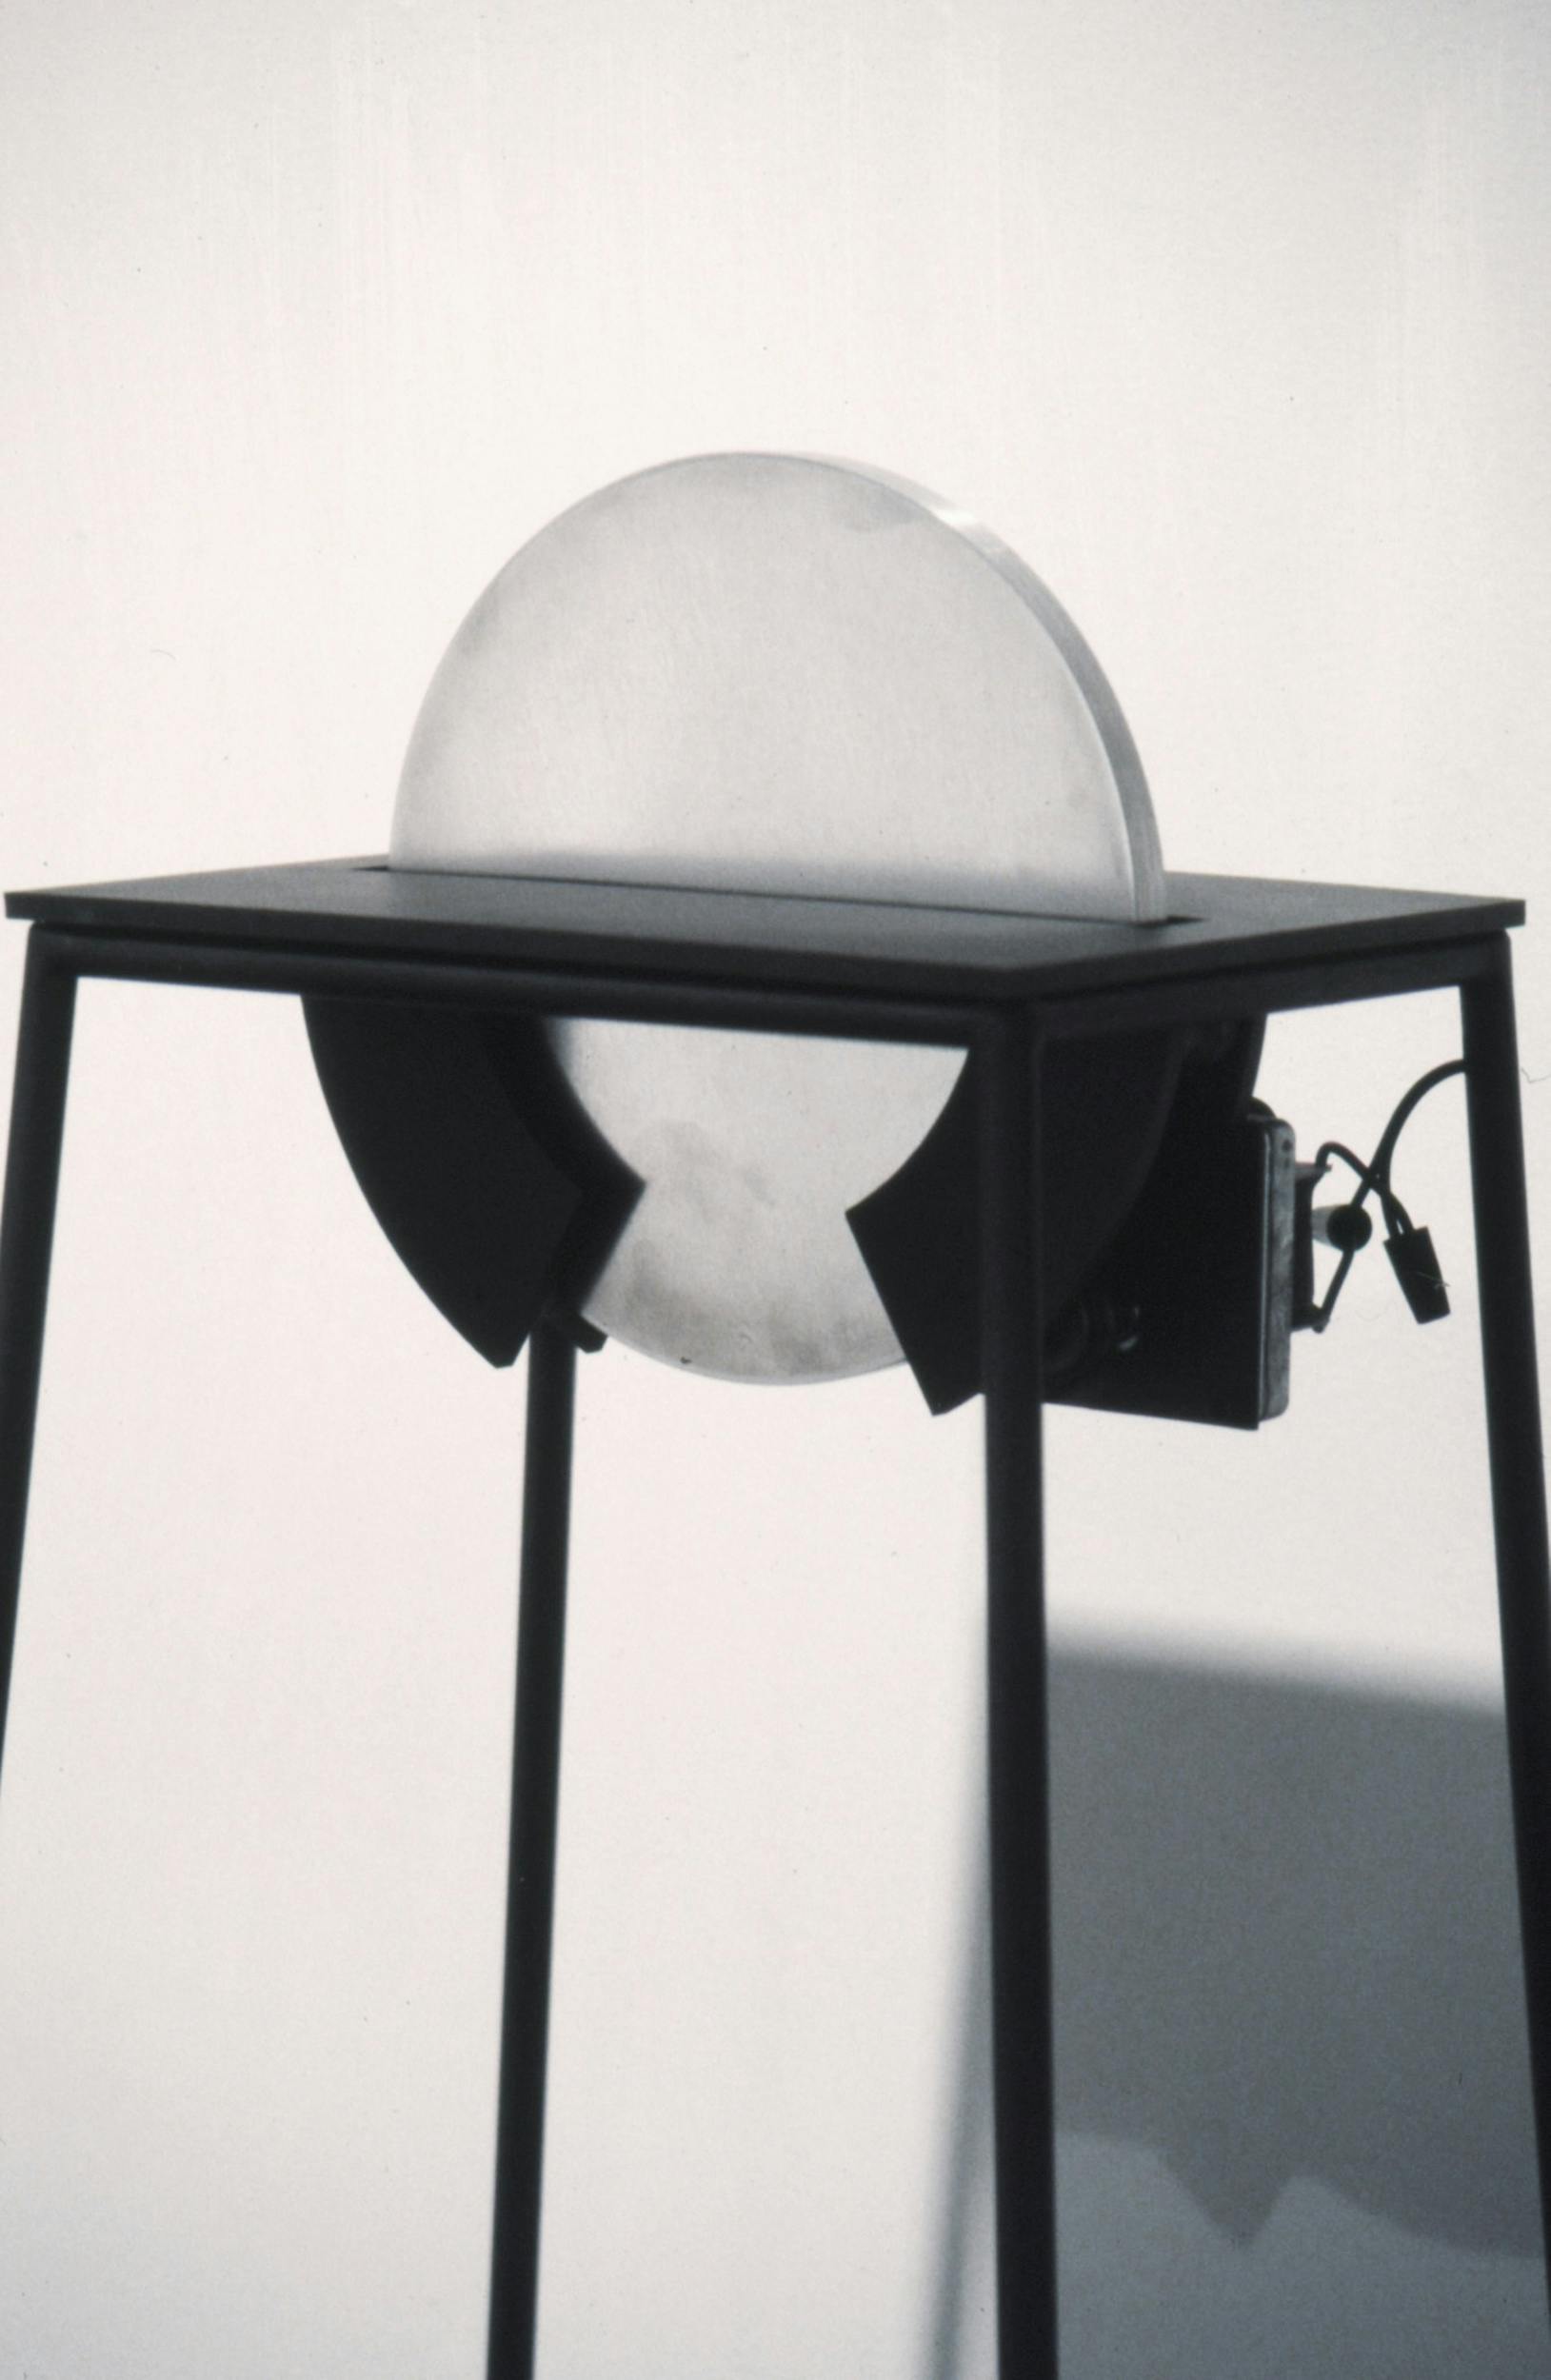 A close view of a sculpture in a gallery. The sculpture is made of a flat metal disk sitting upright in a black stand.